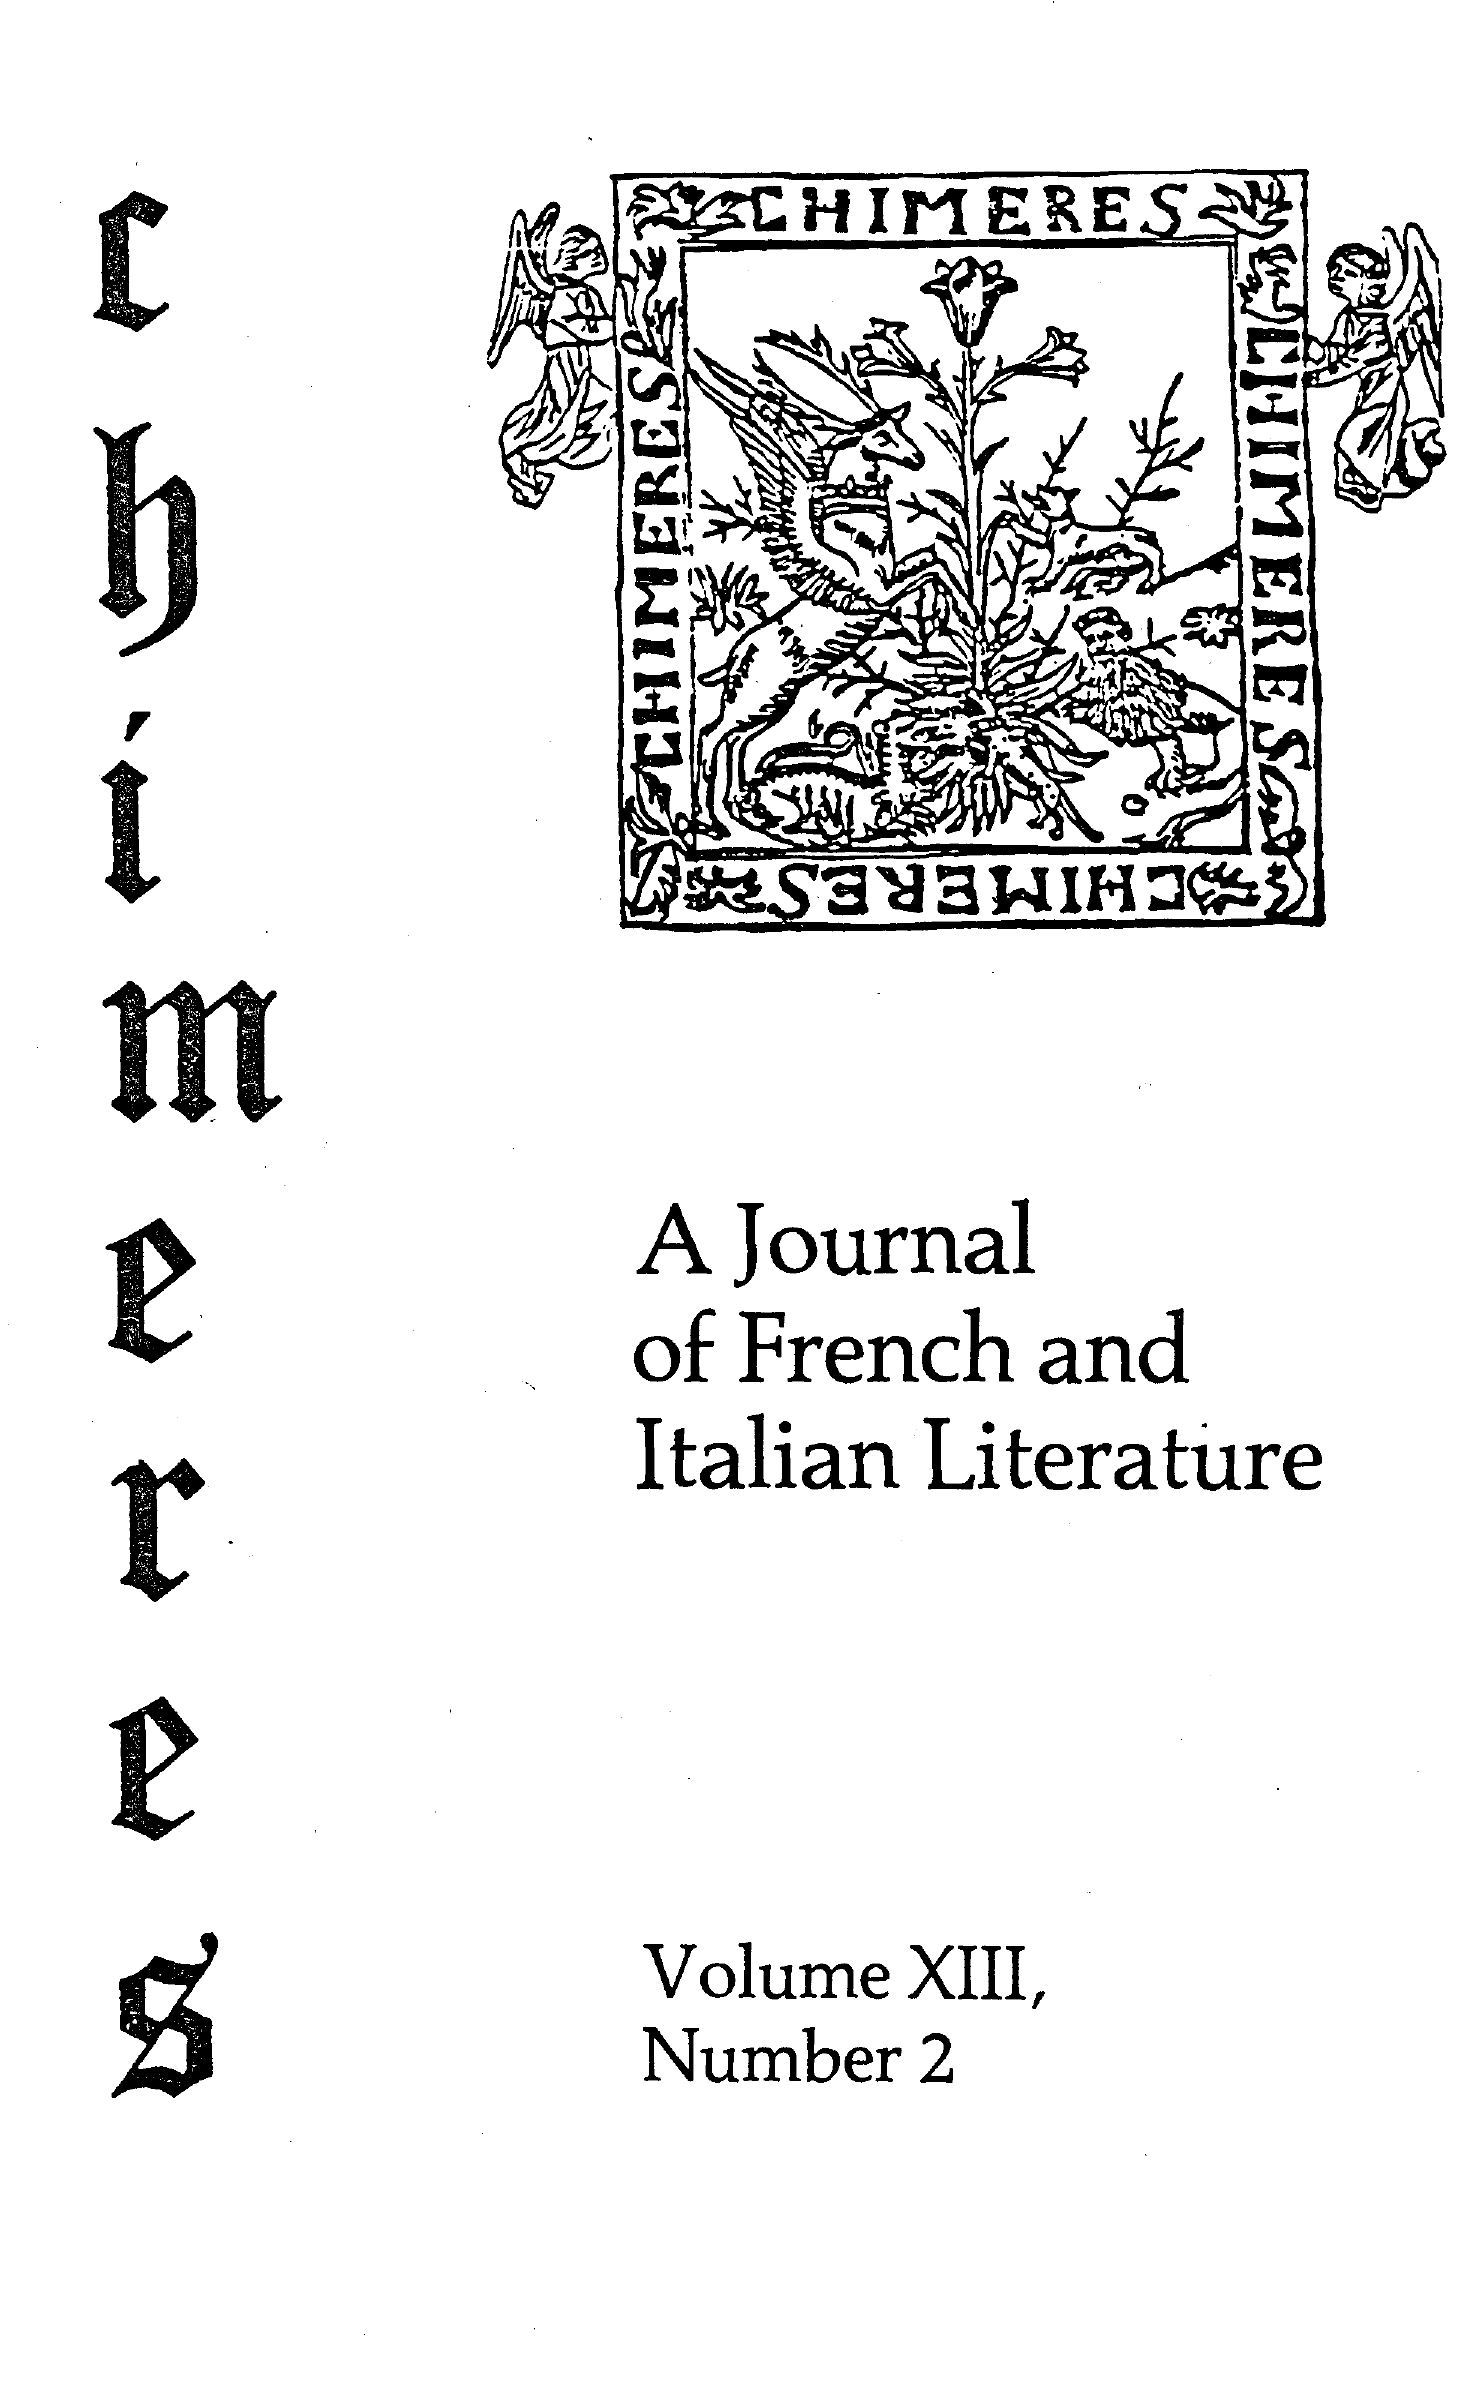 Cover for Chimères, Vol. 13.2, Spring 1980